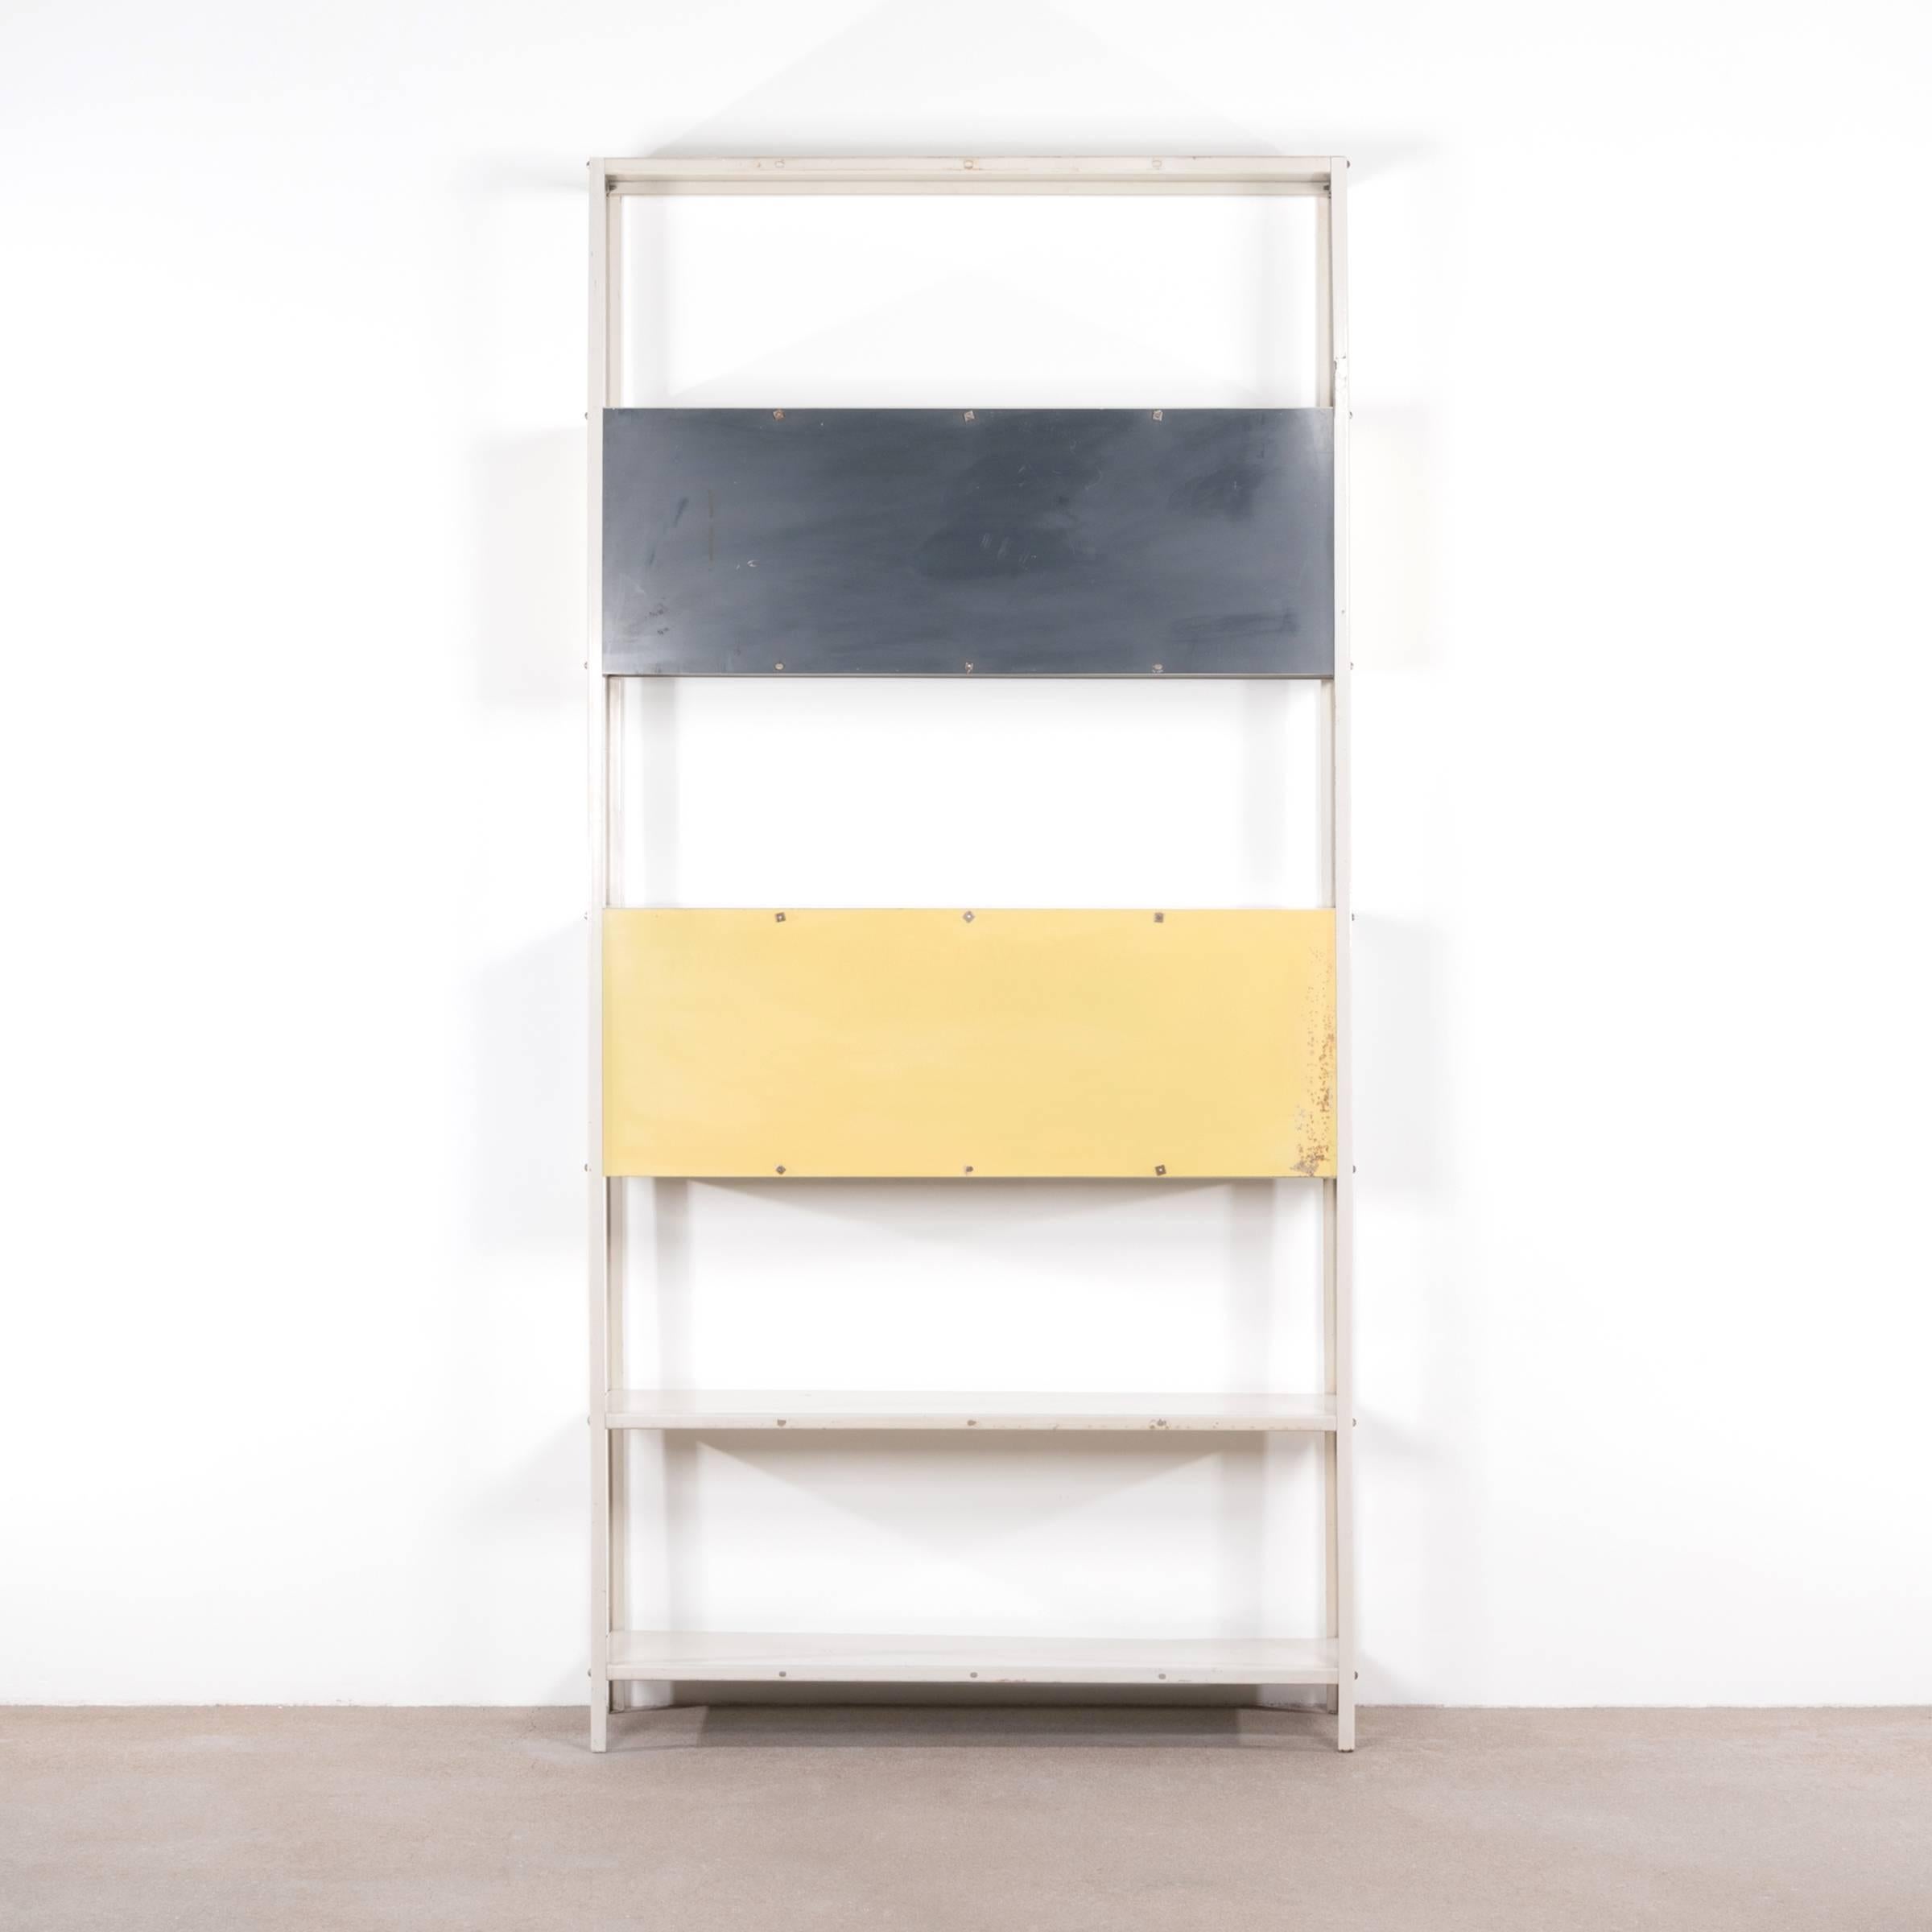 Rare modular bookcase or room divider designed by Friso Kramer in 1953 for 'De Bijenkorf' and produced by Asmeta. 
Good original condition with traces of use.